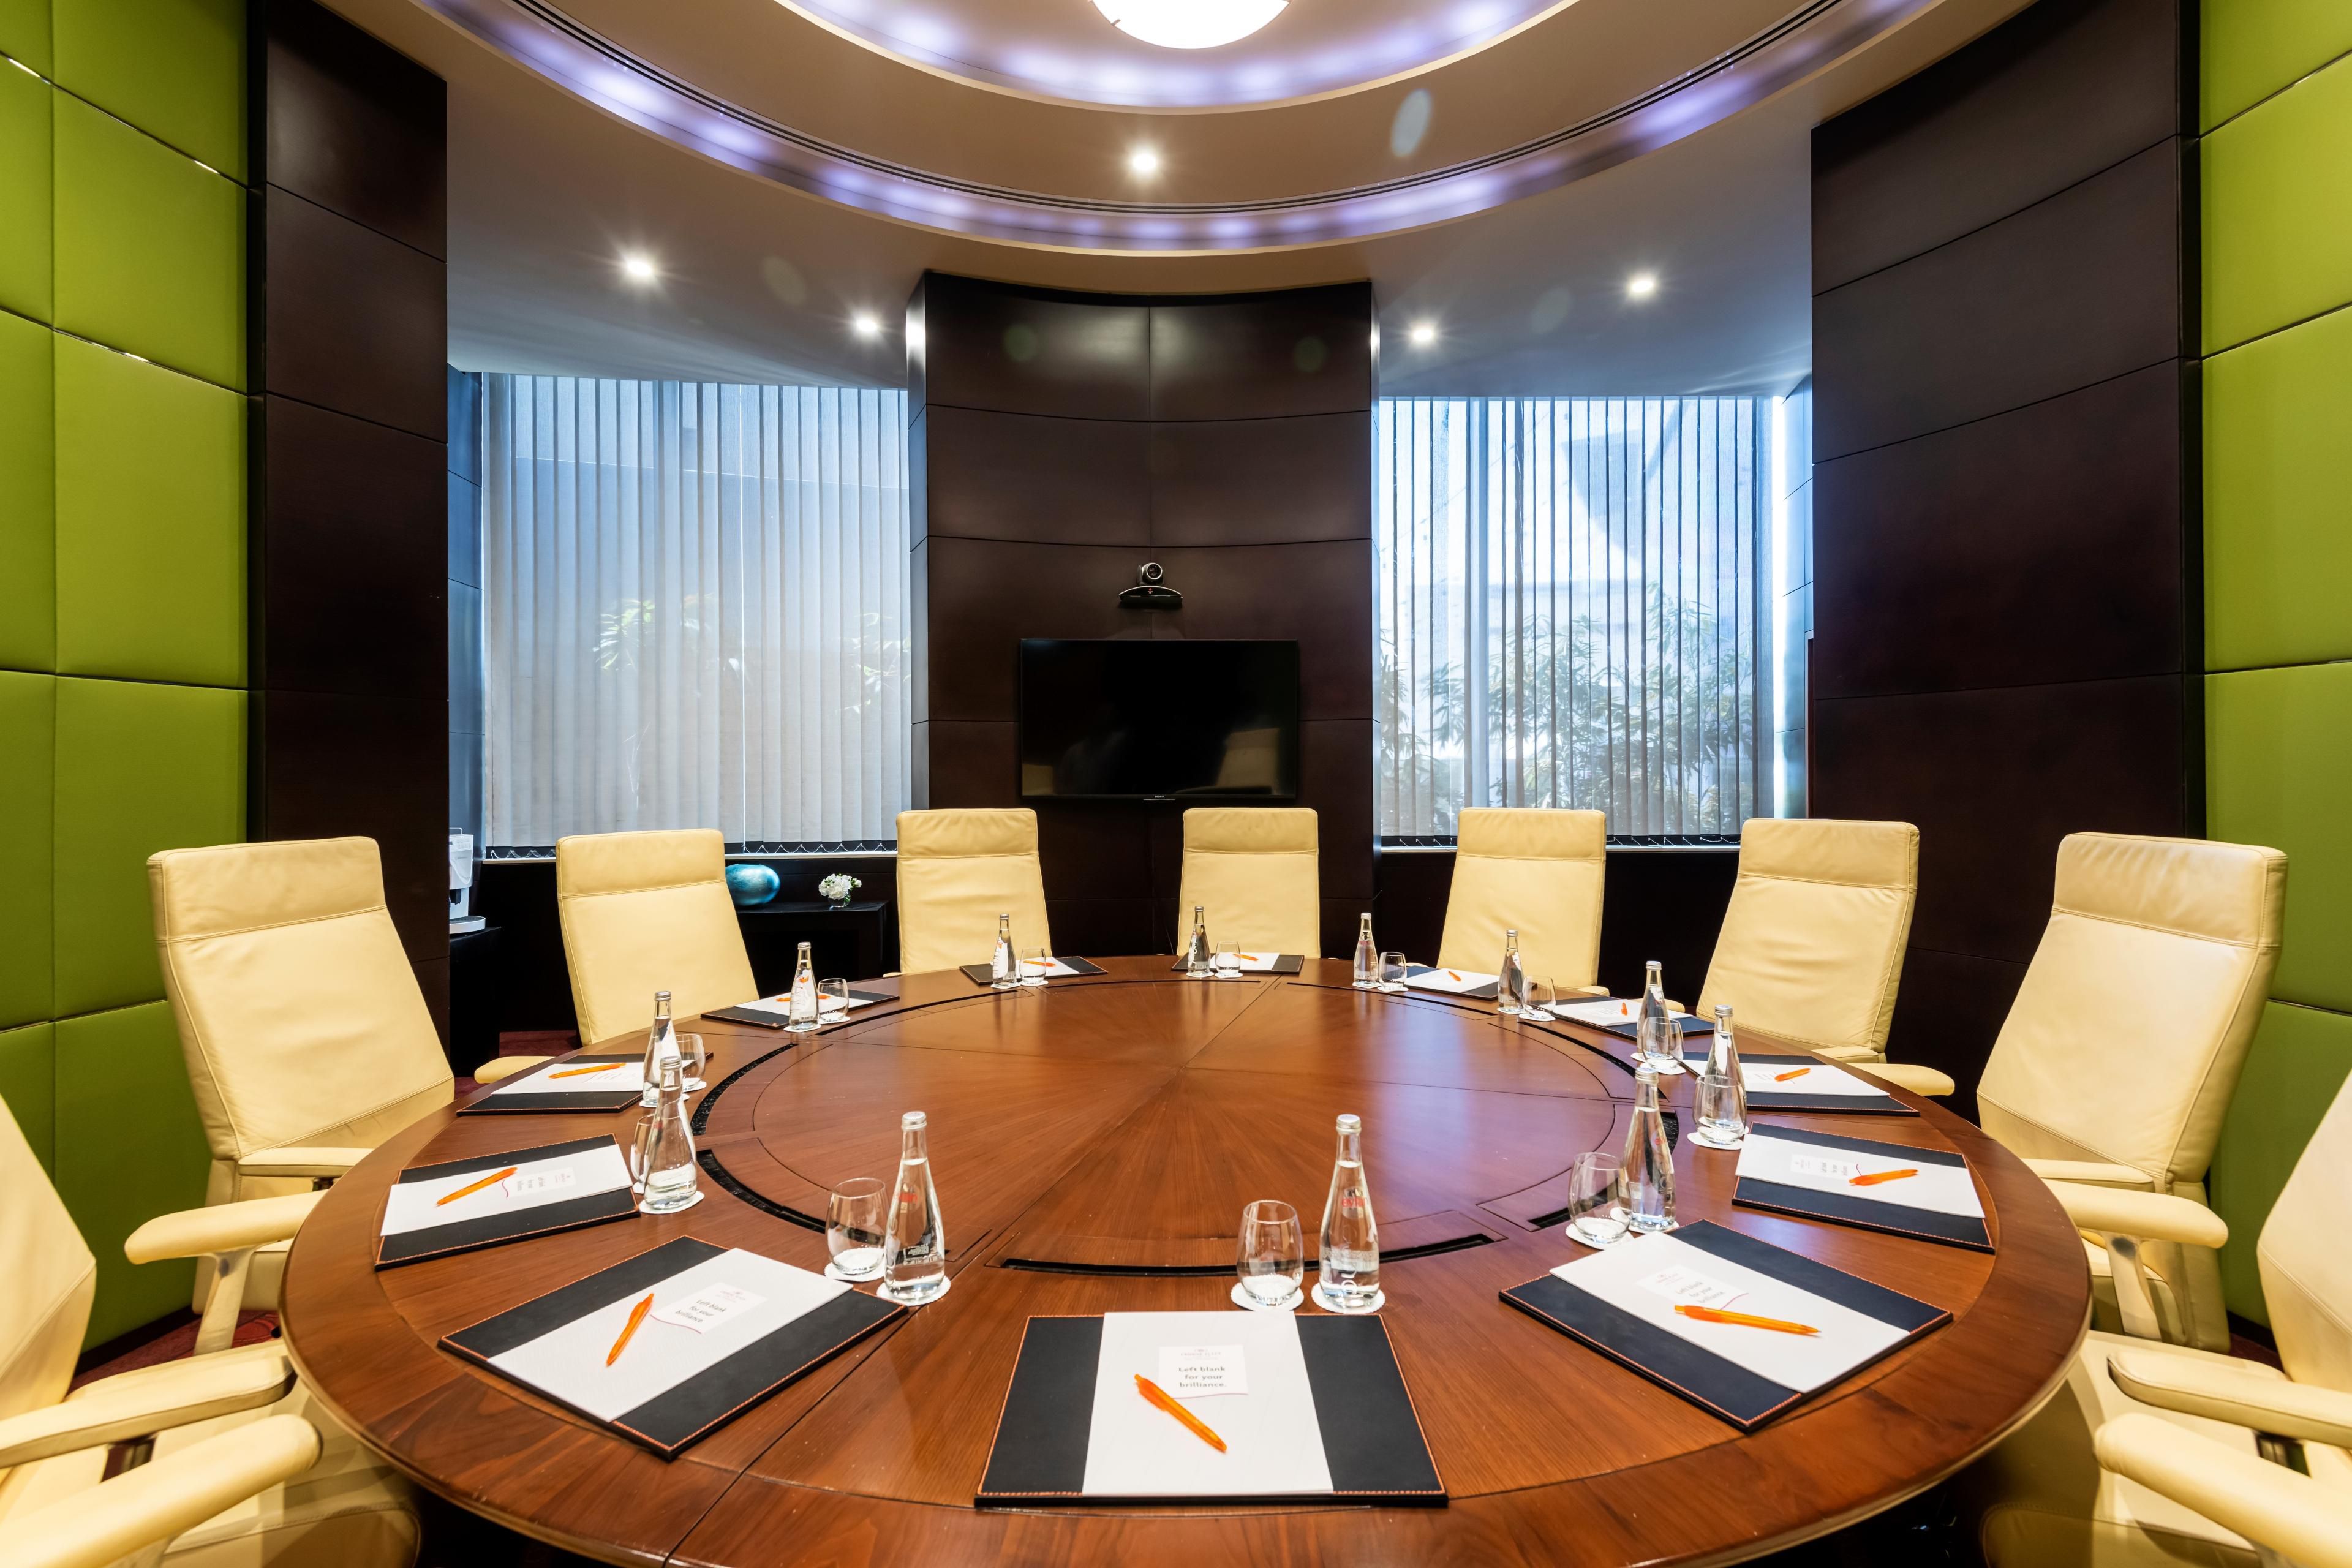 Hidayah boardroom is a great meeting place for business guests